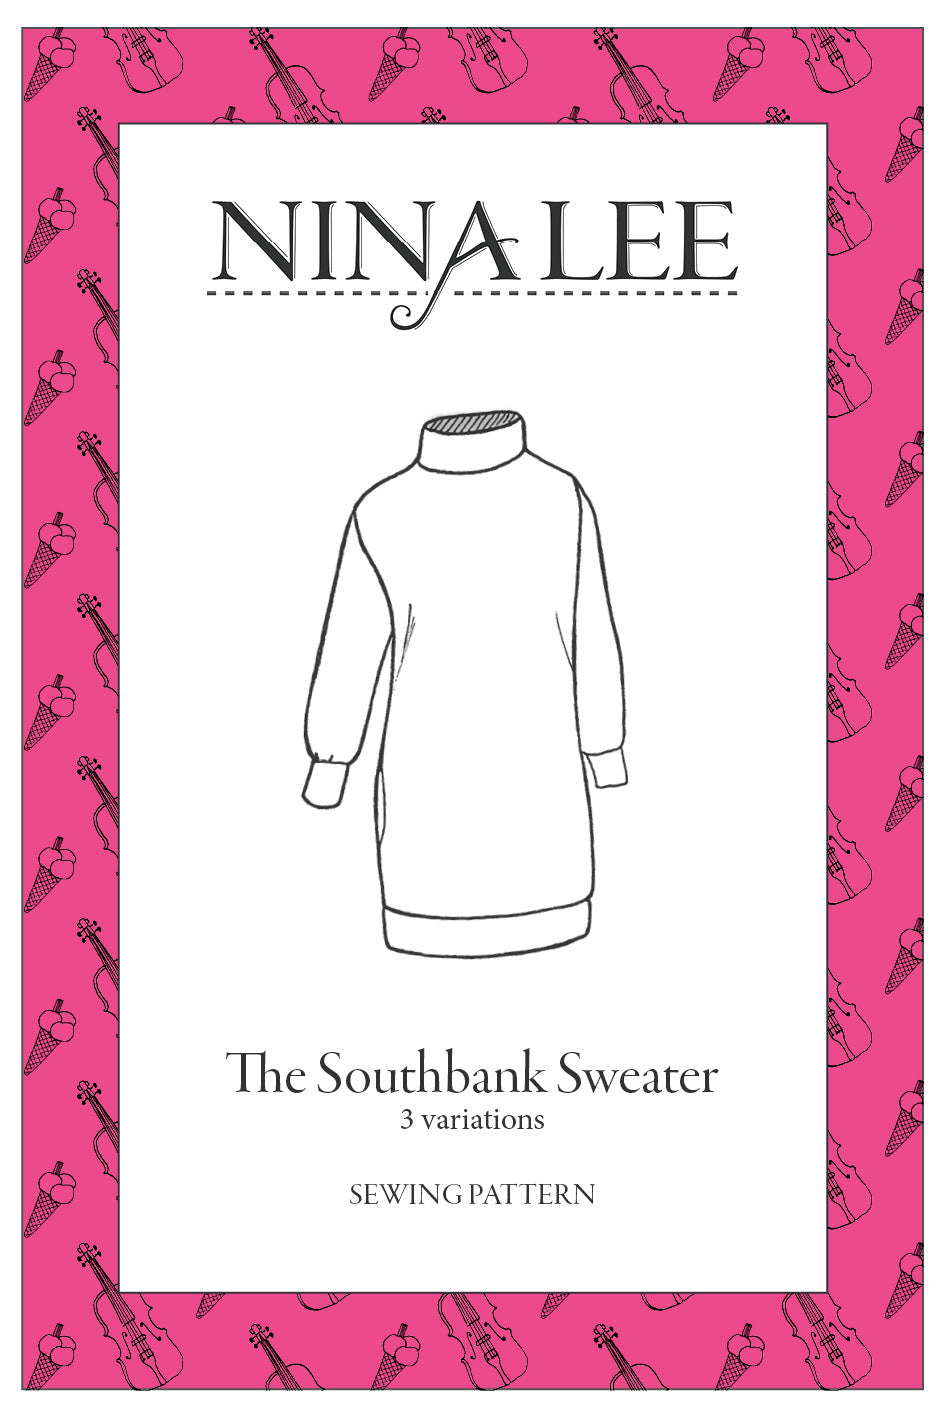 NINALEE The Southbank Sweater Sewing Pattern